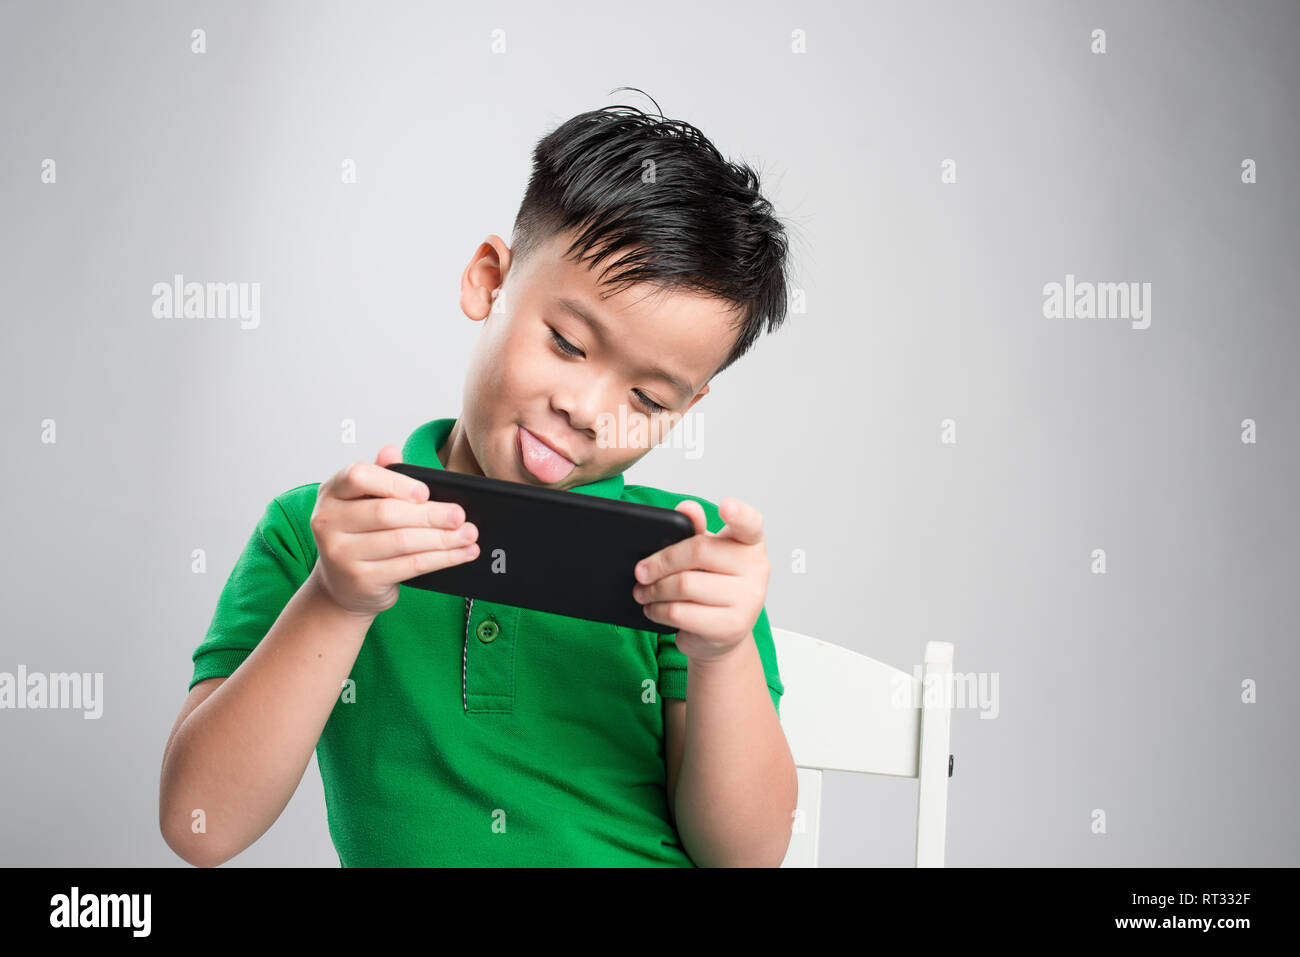 Portrait of an amused cute little kid playing games on smartphone isolated over gray background Stock Photo